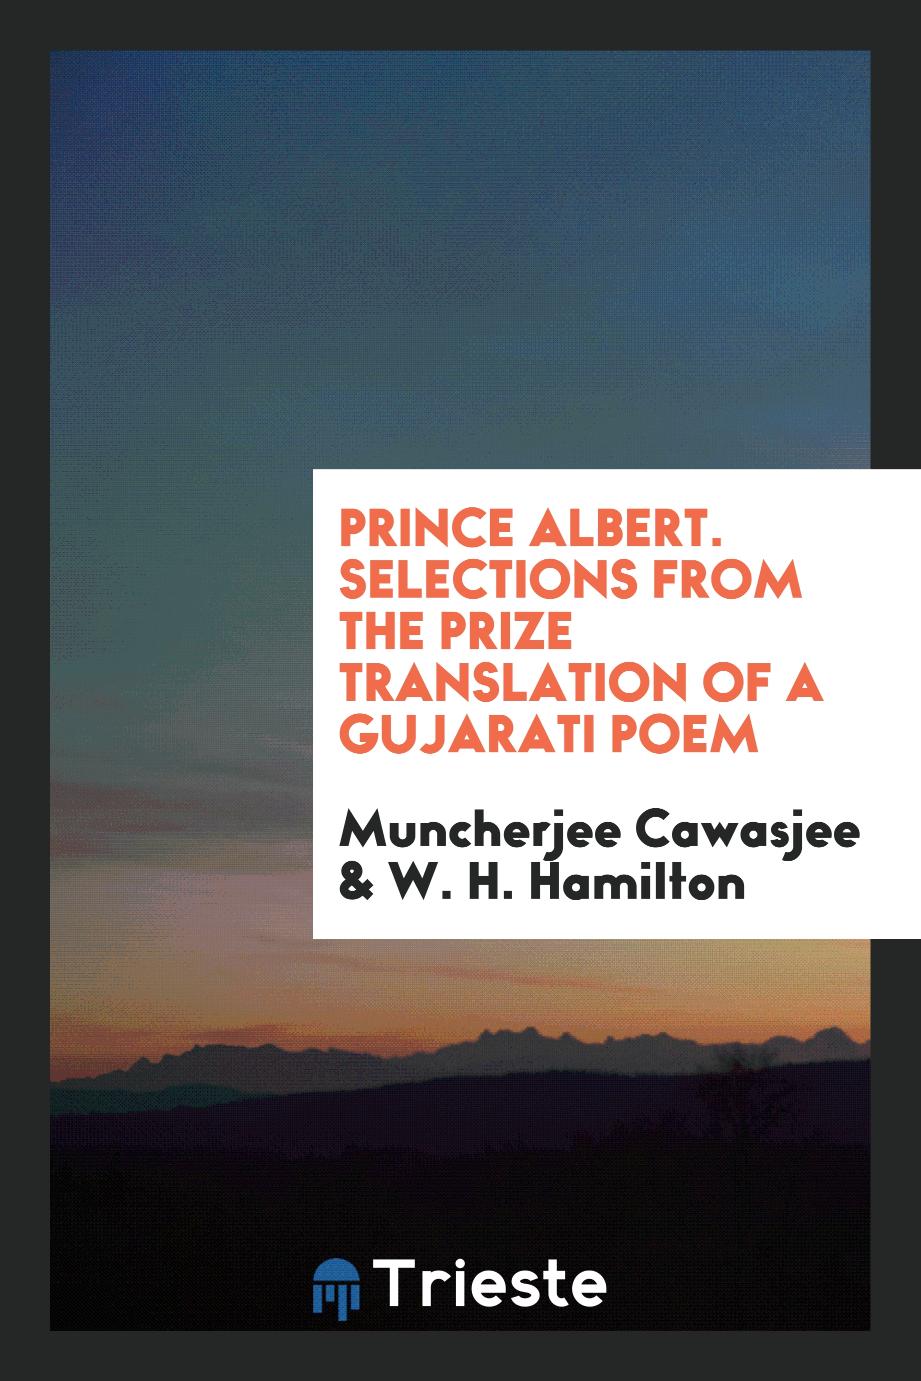 Prince Albert. Selections from the prize translation of a Gujarati poem